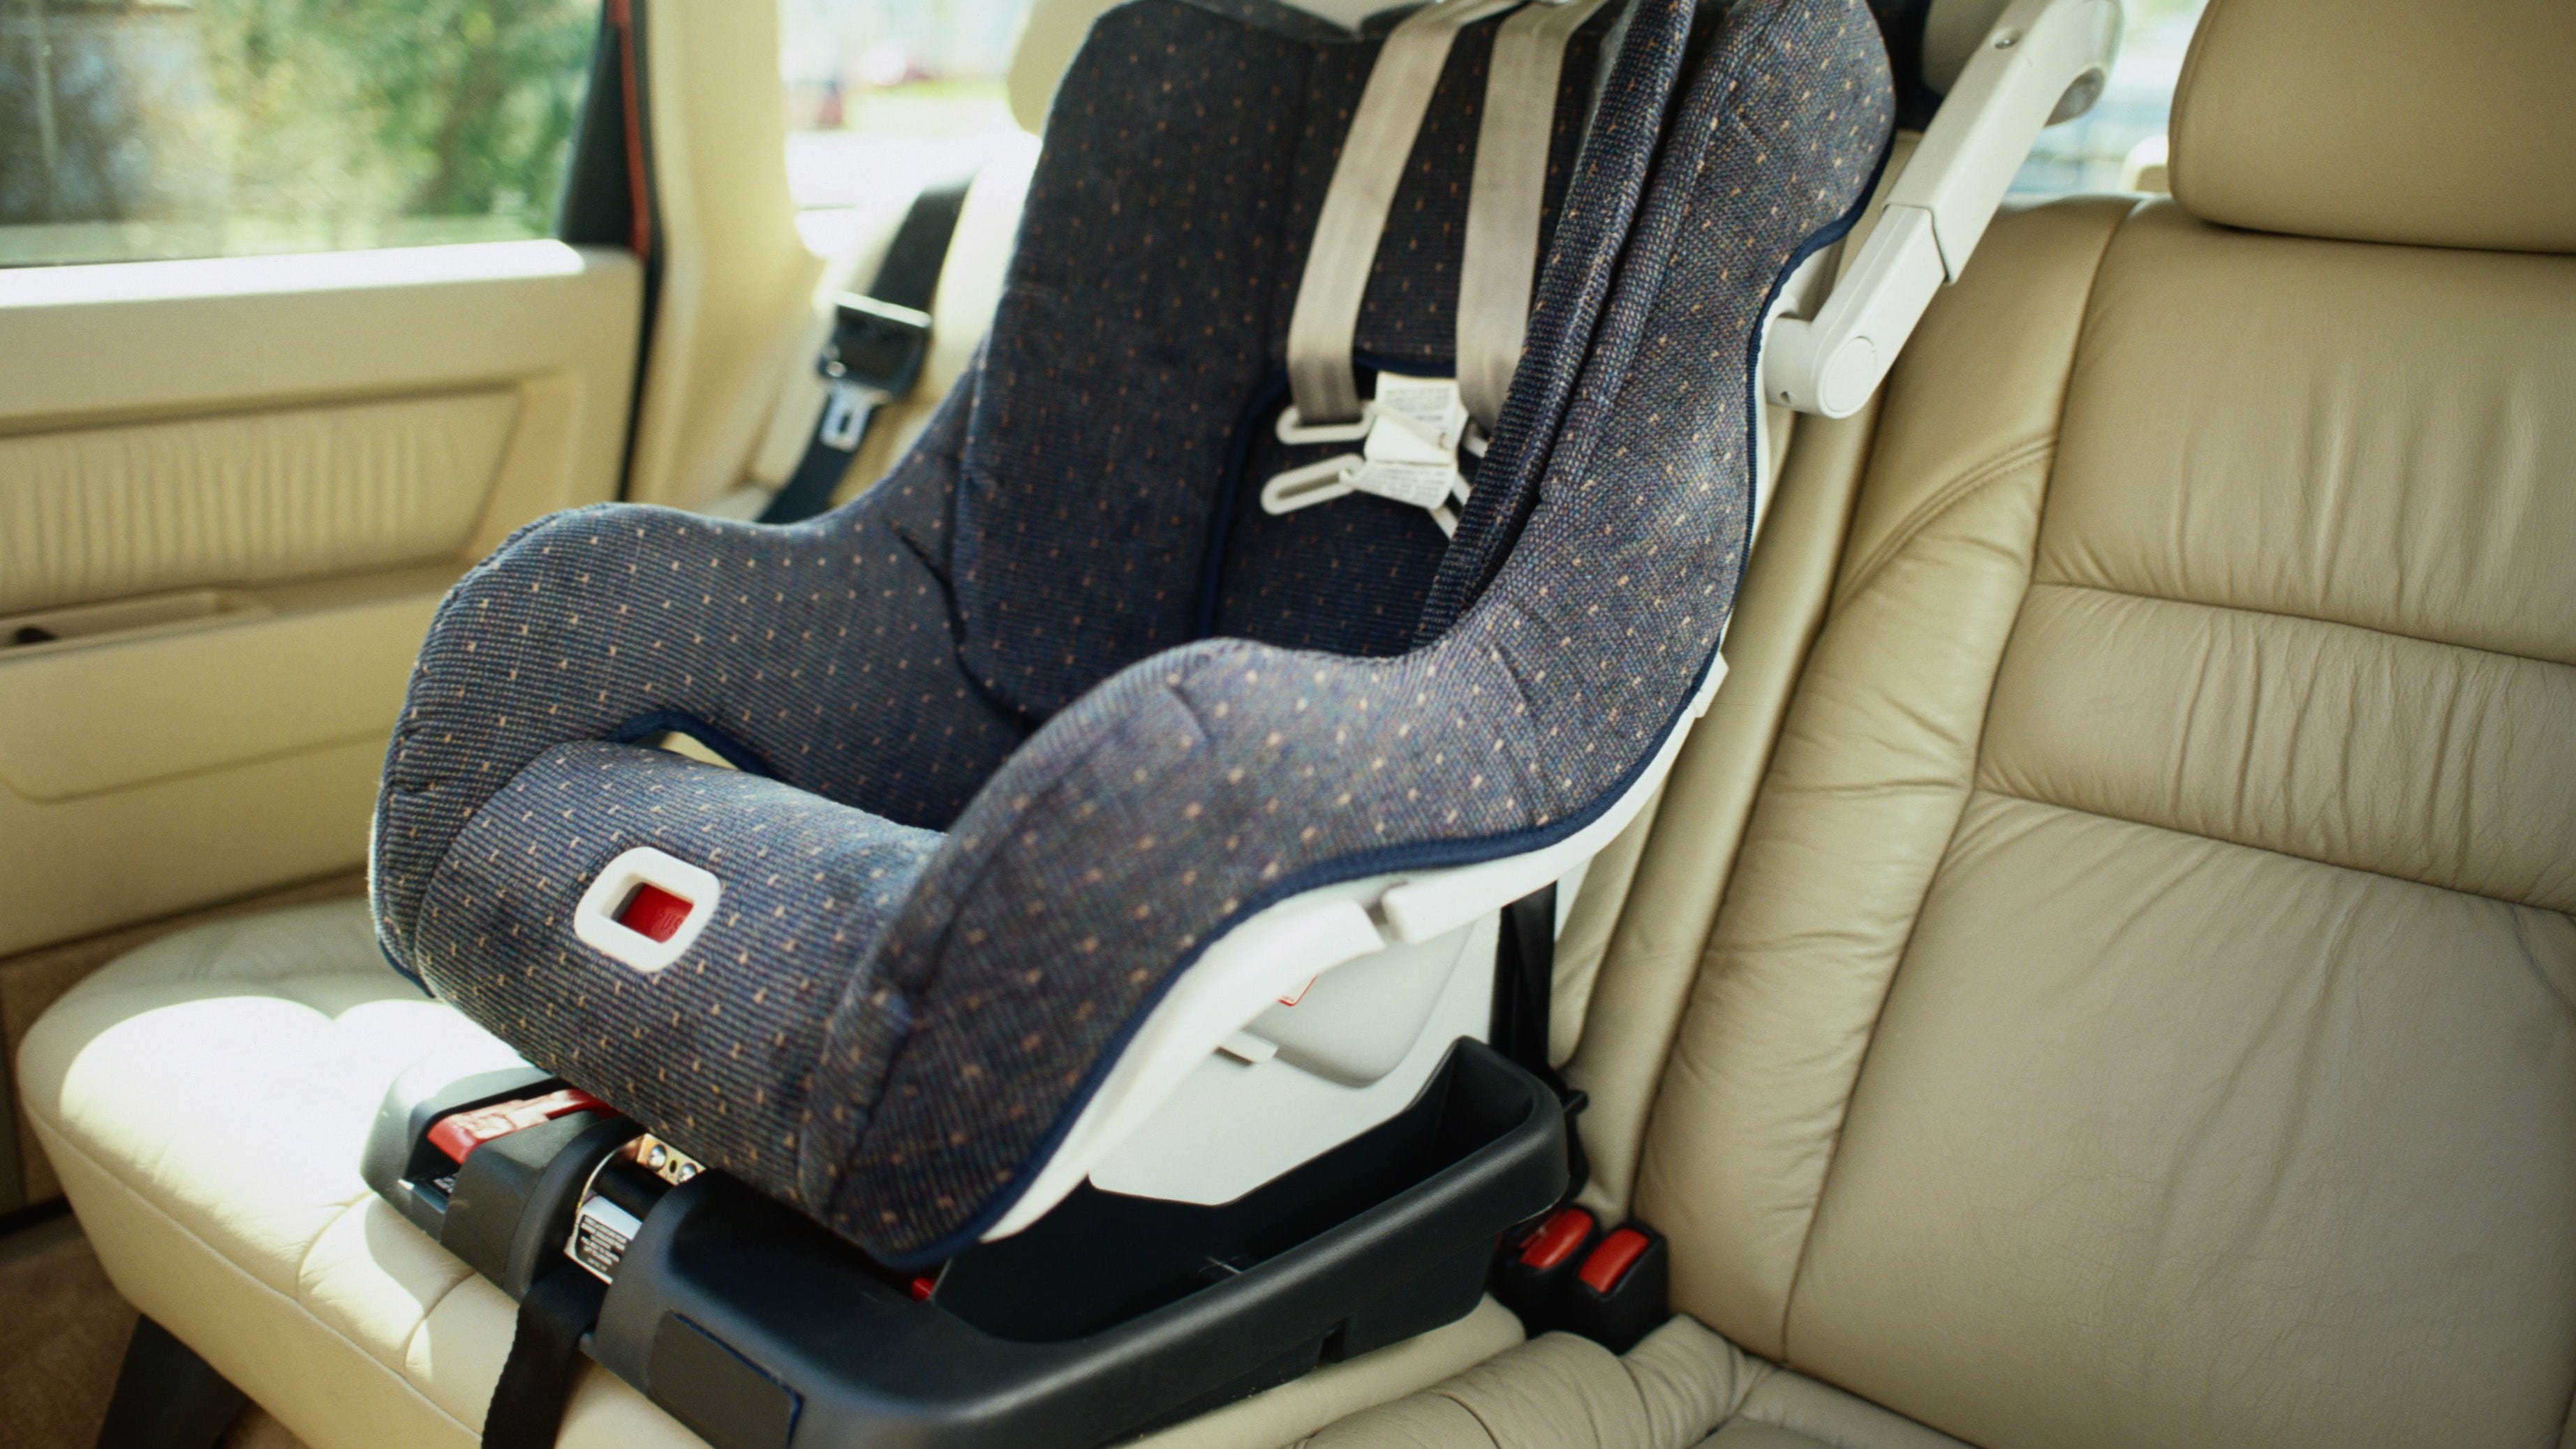 New Aap Car Seat Safety Guidelines When A Child Should Face Forward - What Are The Rules For Forward Facing Car Seats